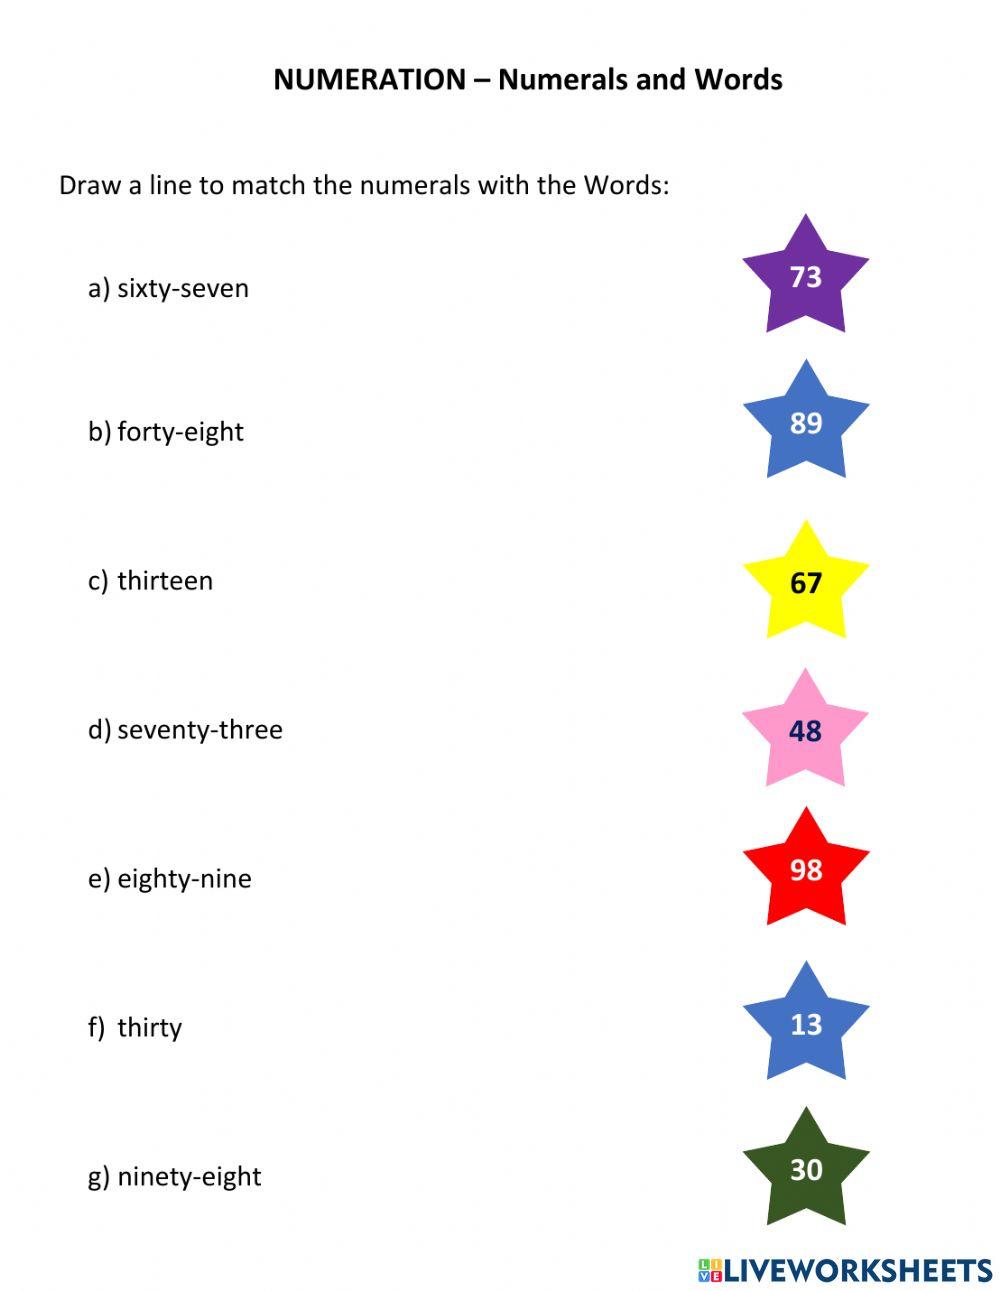 Numeration - Numerals and Words